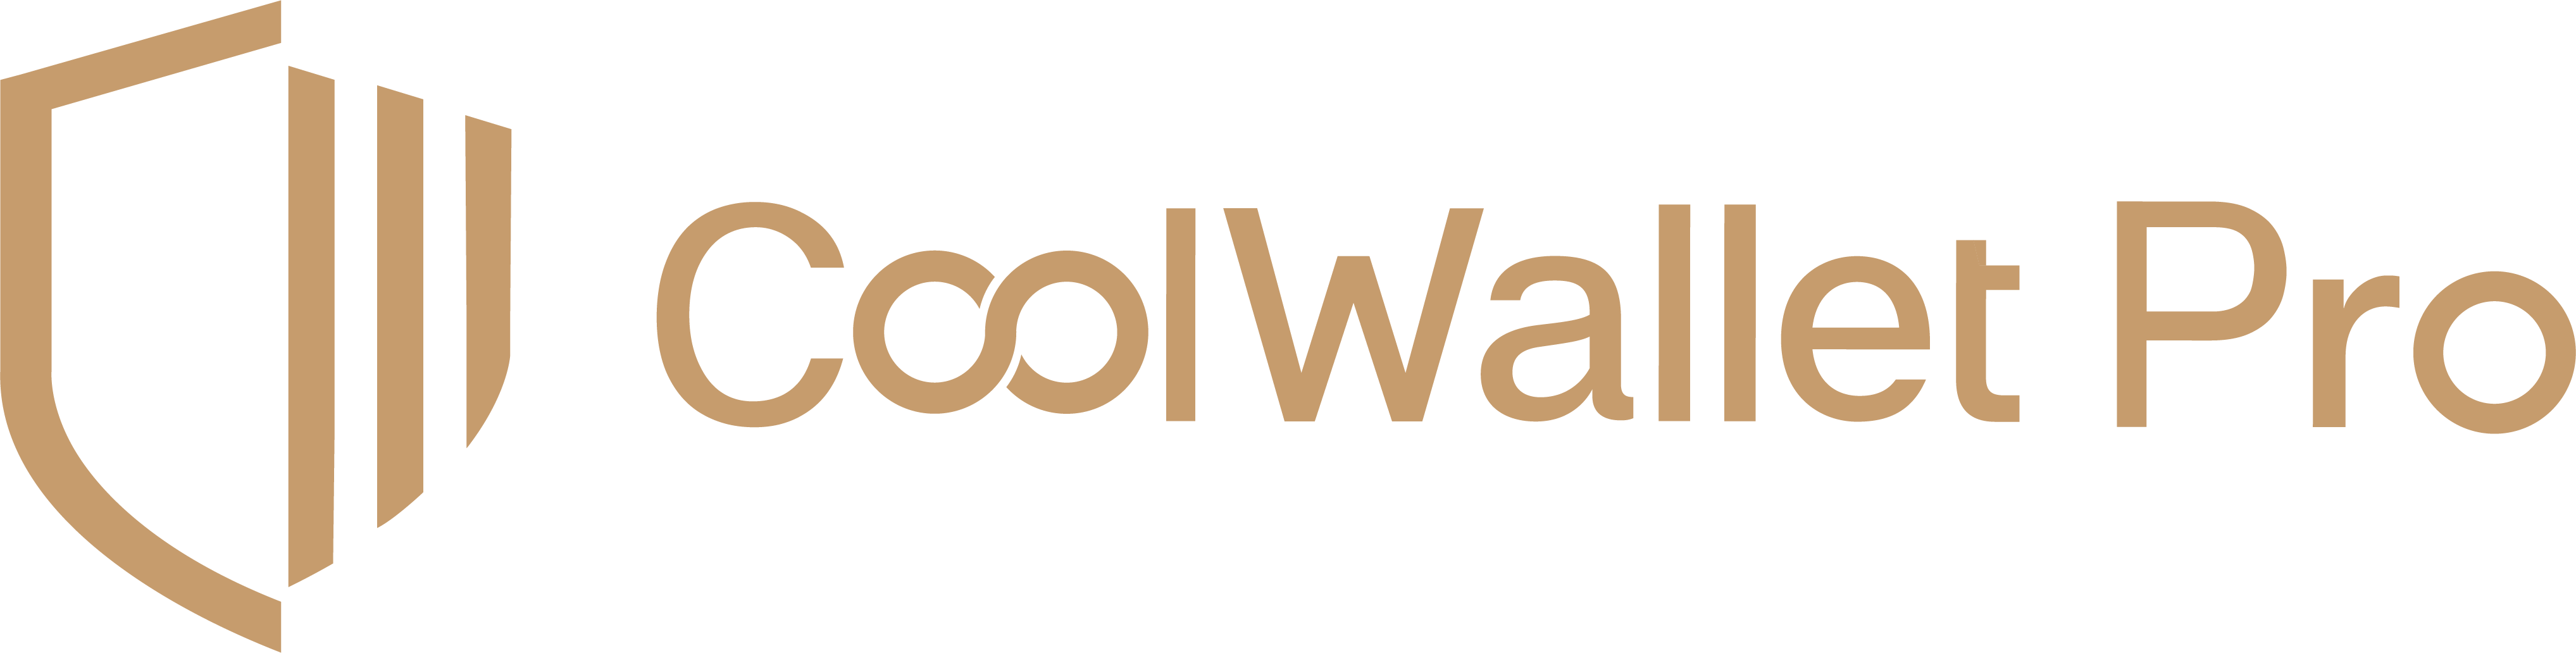 CoolWallet Pro Firmware Logo